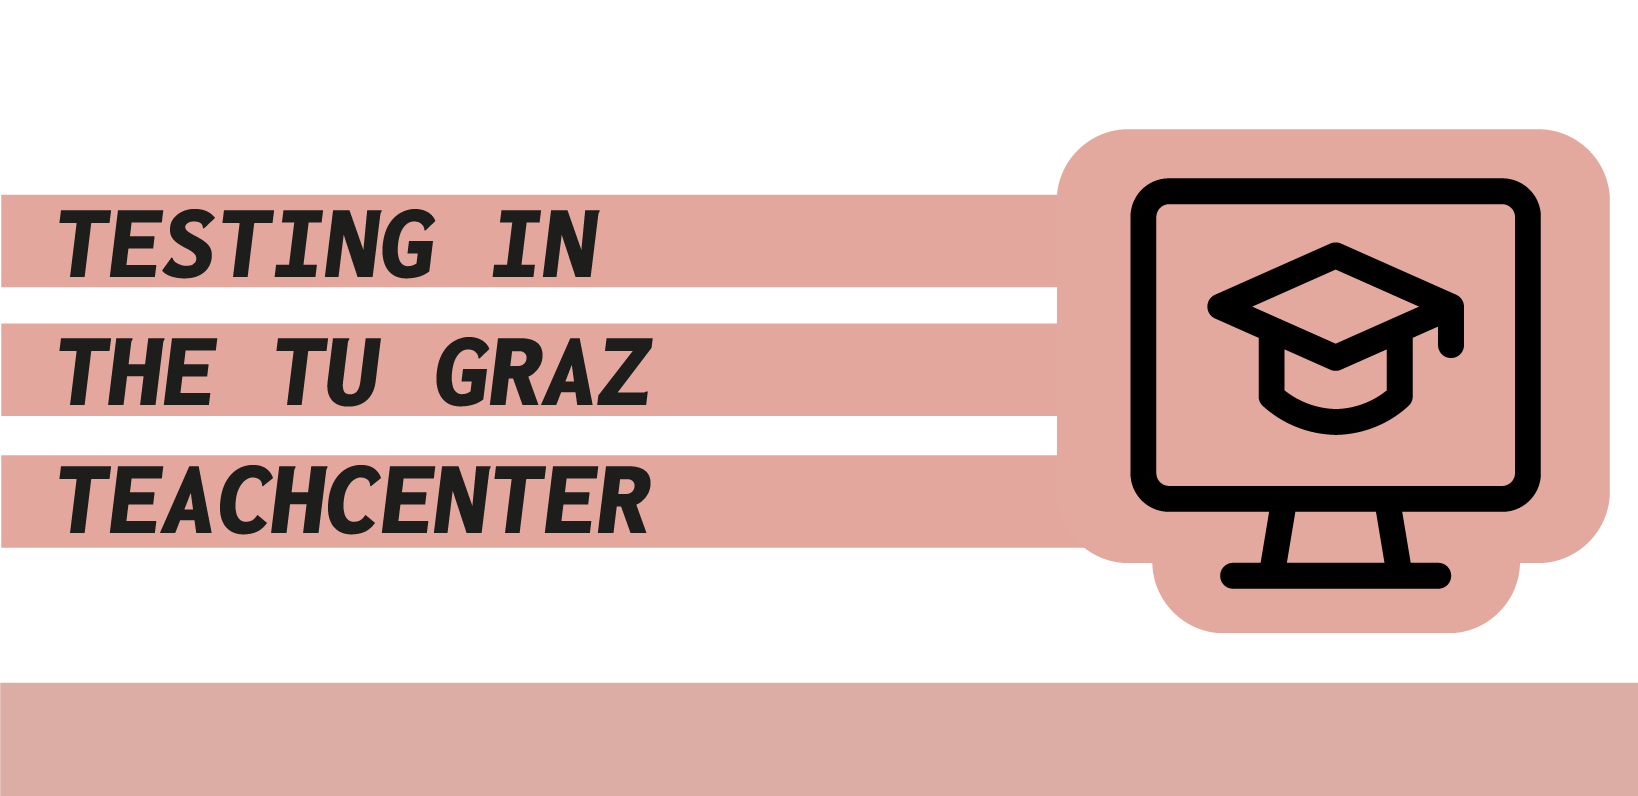 an illustrated outline of a monitor and the words News - Testing in the tu graz TeachCenter